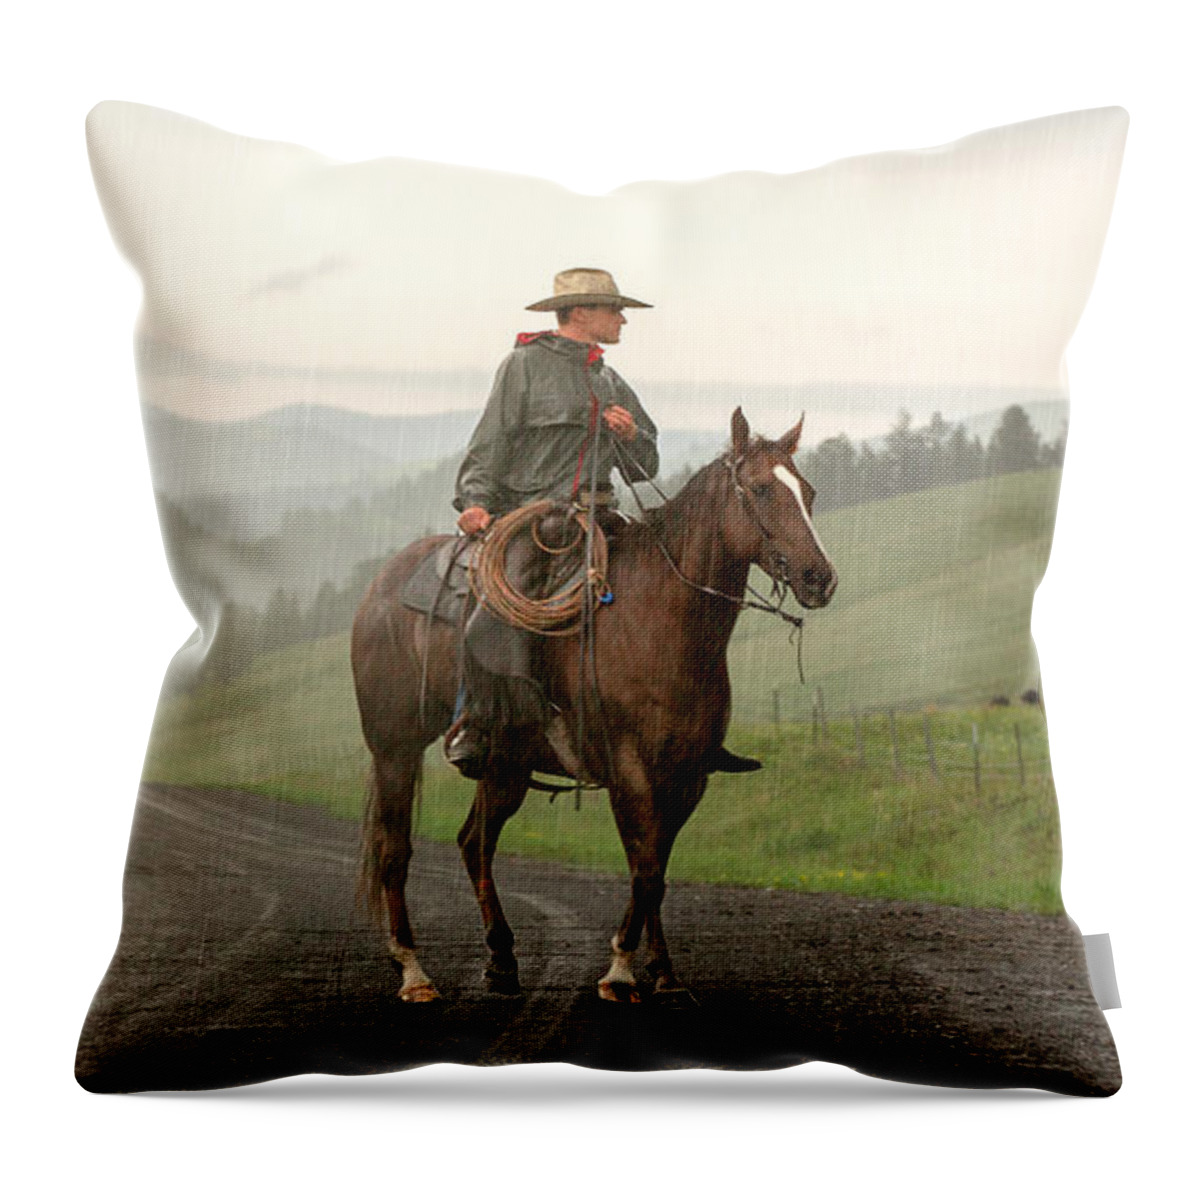 Cowboy Throw Pillow featuring the photograph Braving the Rain by Todd Klassy